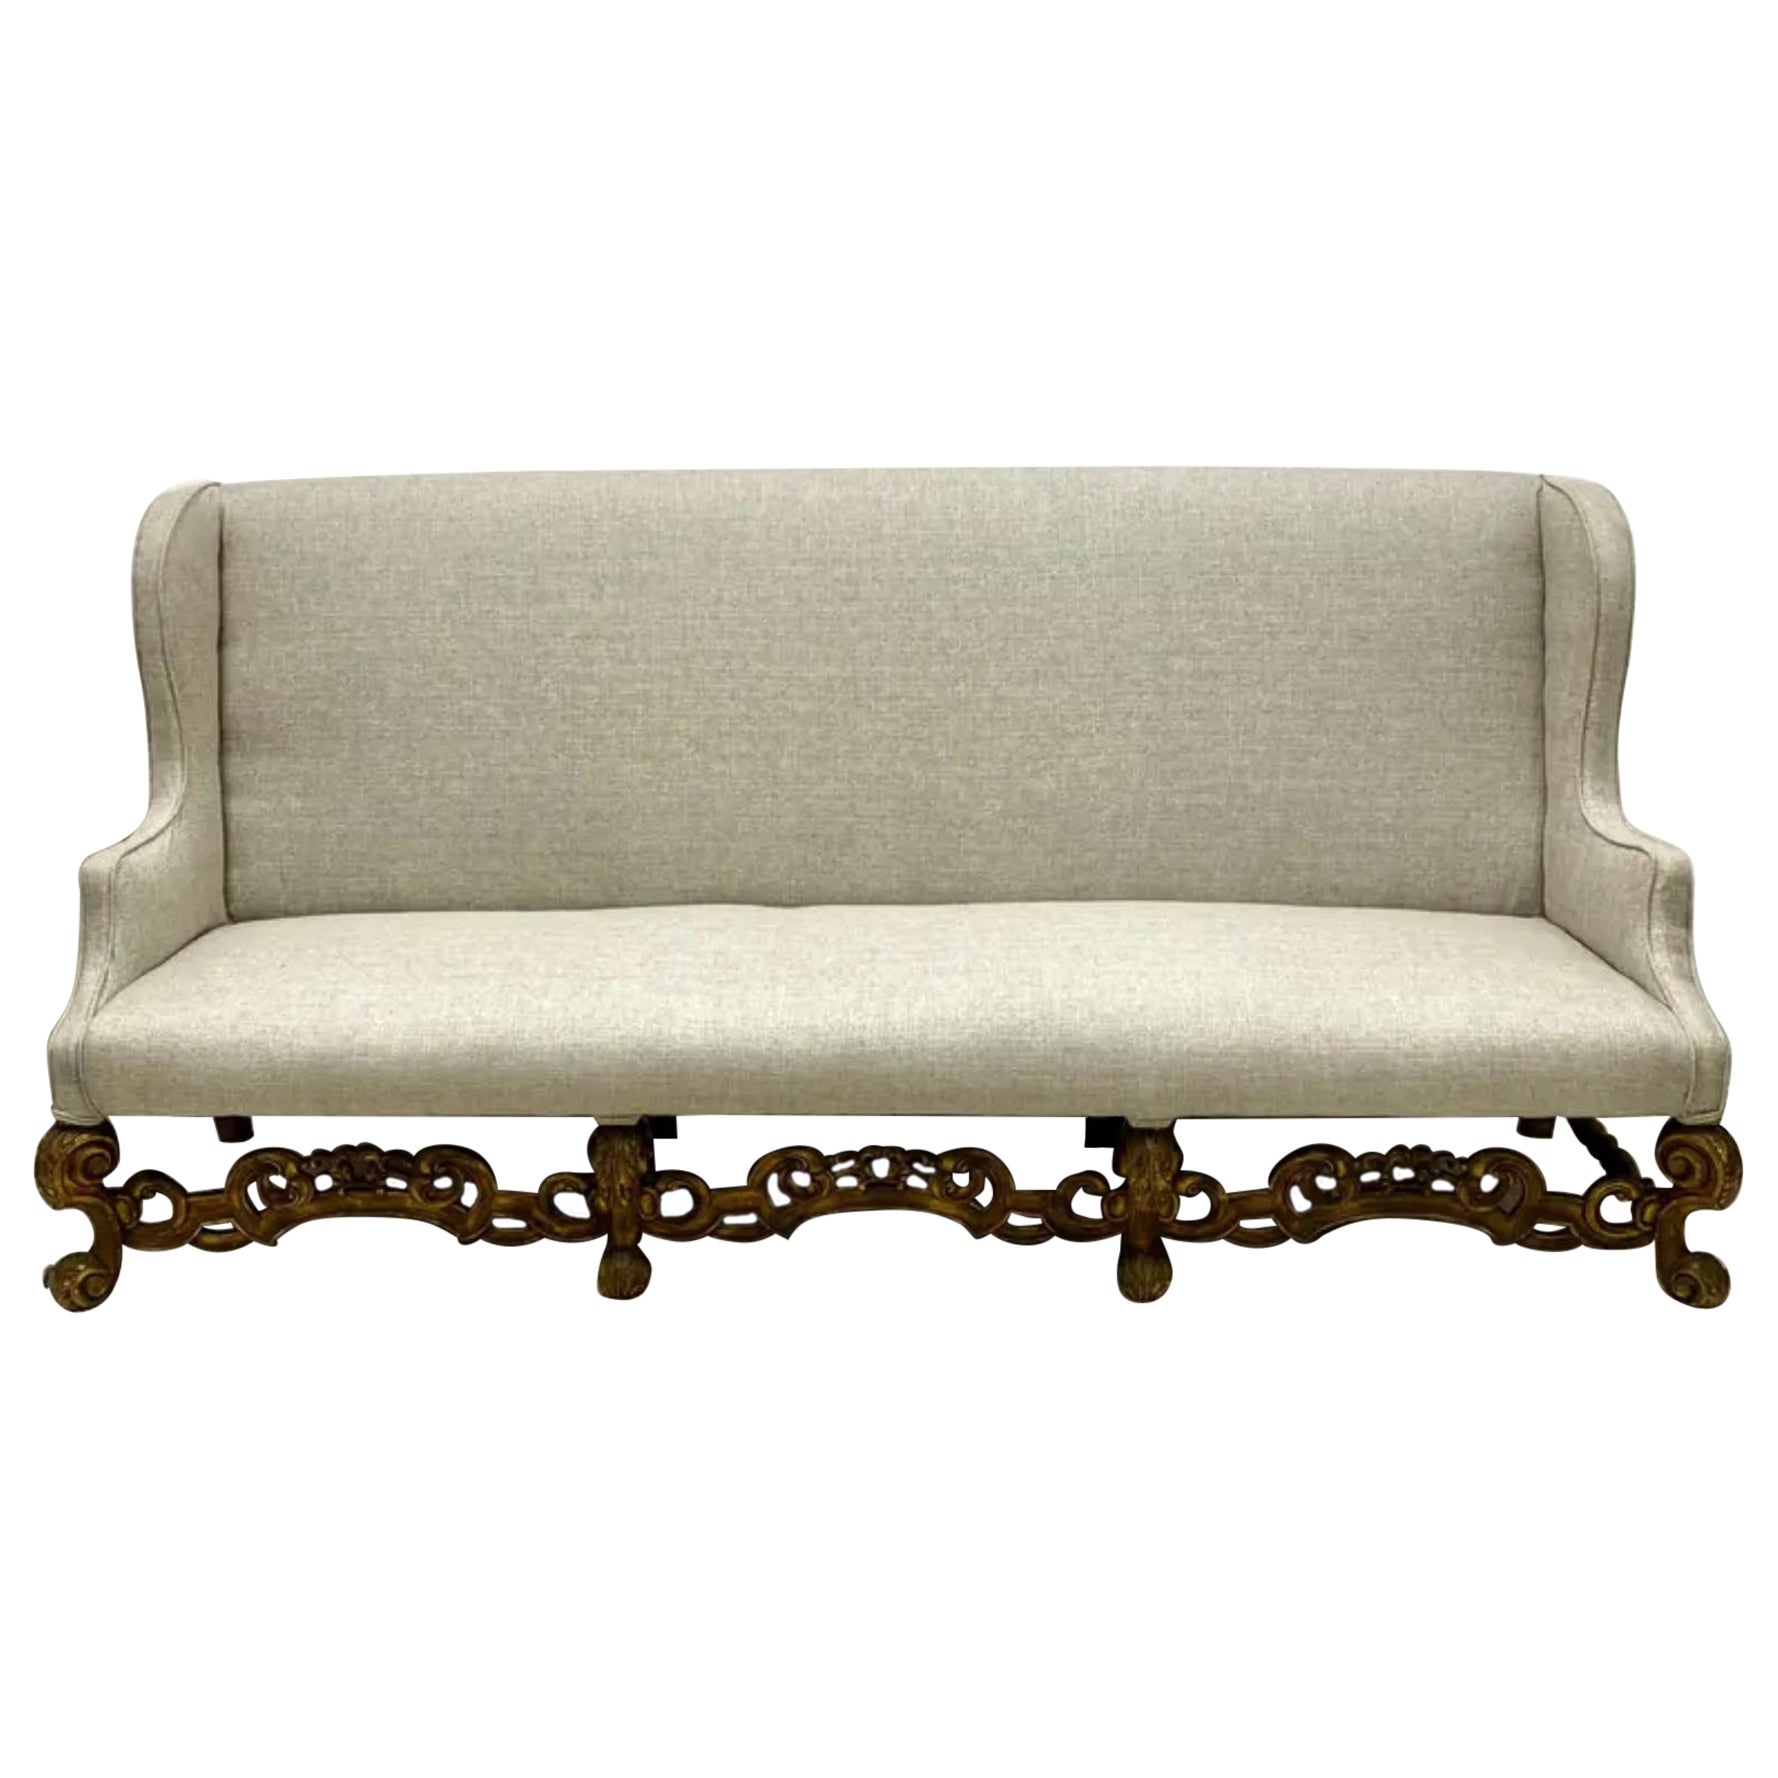 Antique Carved Walnut French Sofa in Linen